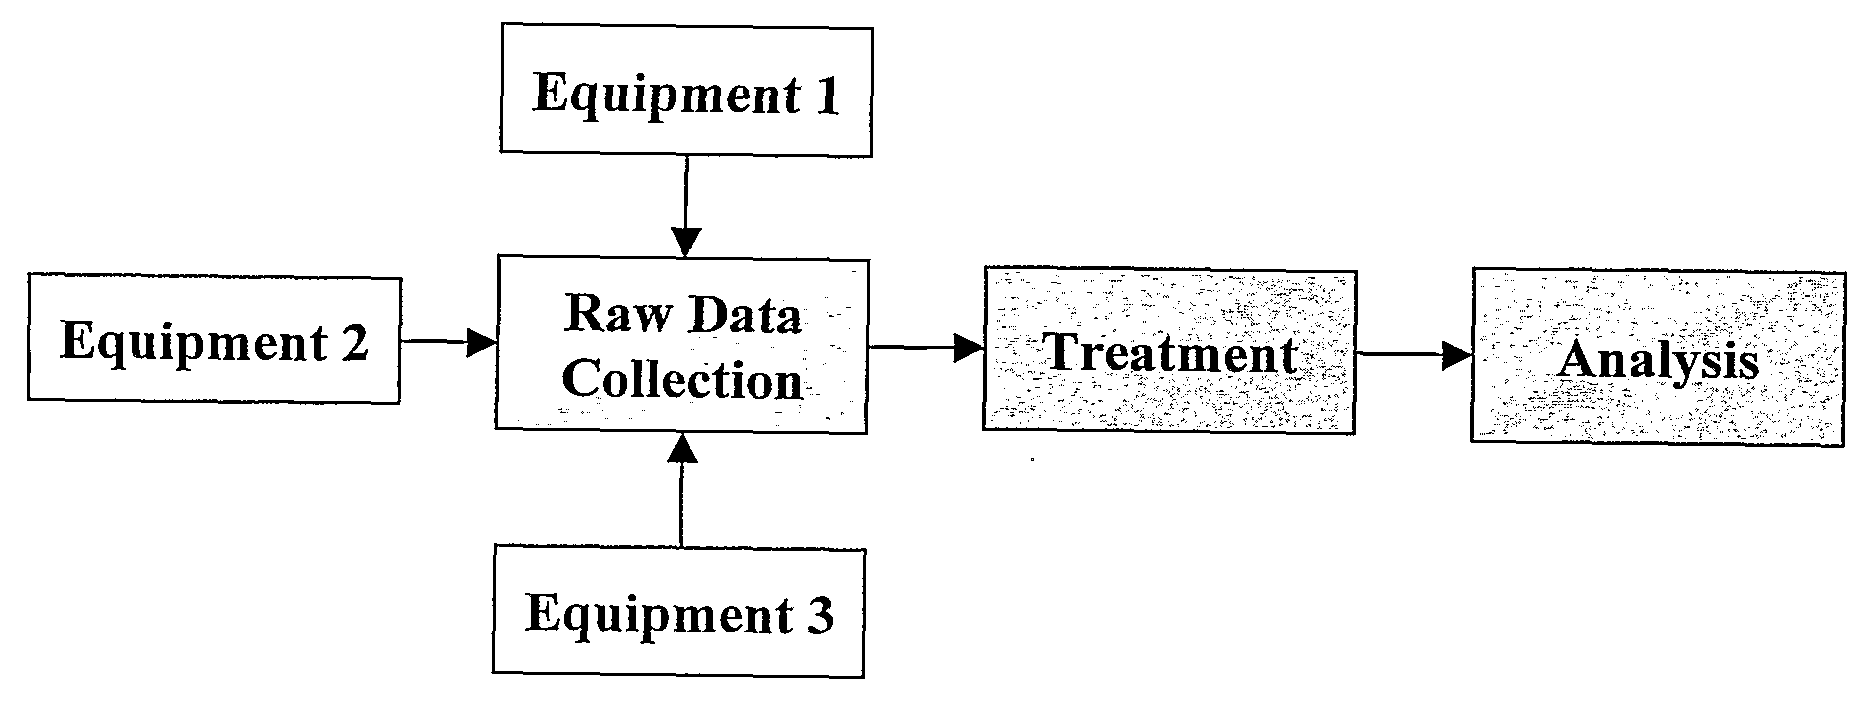 Method for Evaluating the Quality of Data Collection in a Manufacturing Environment